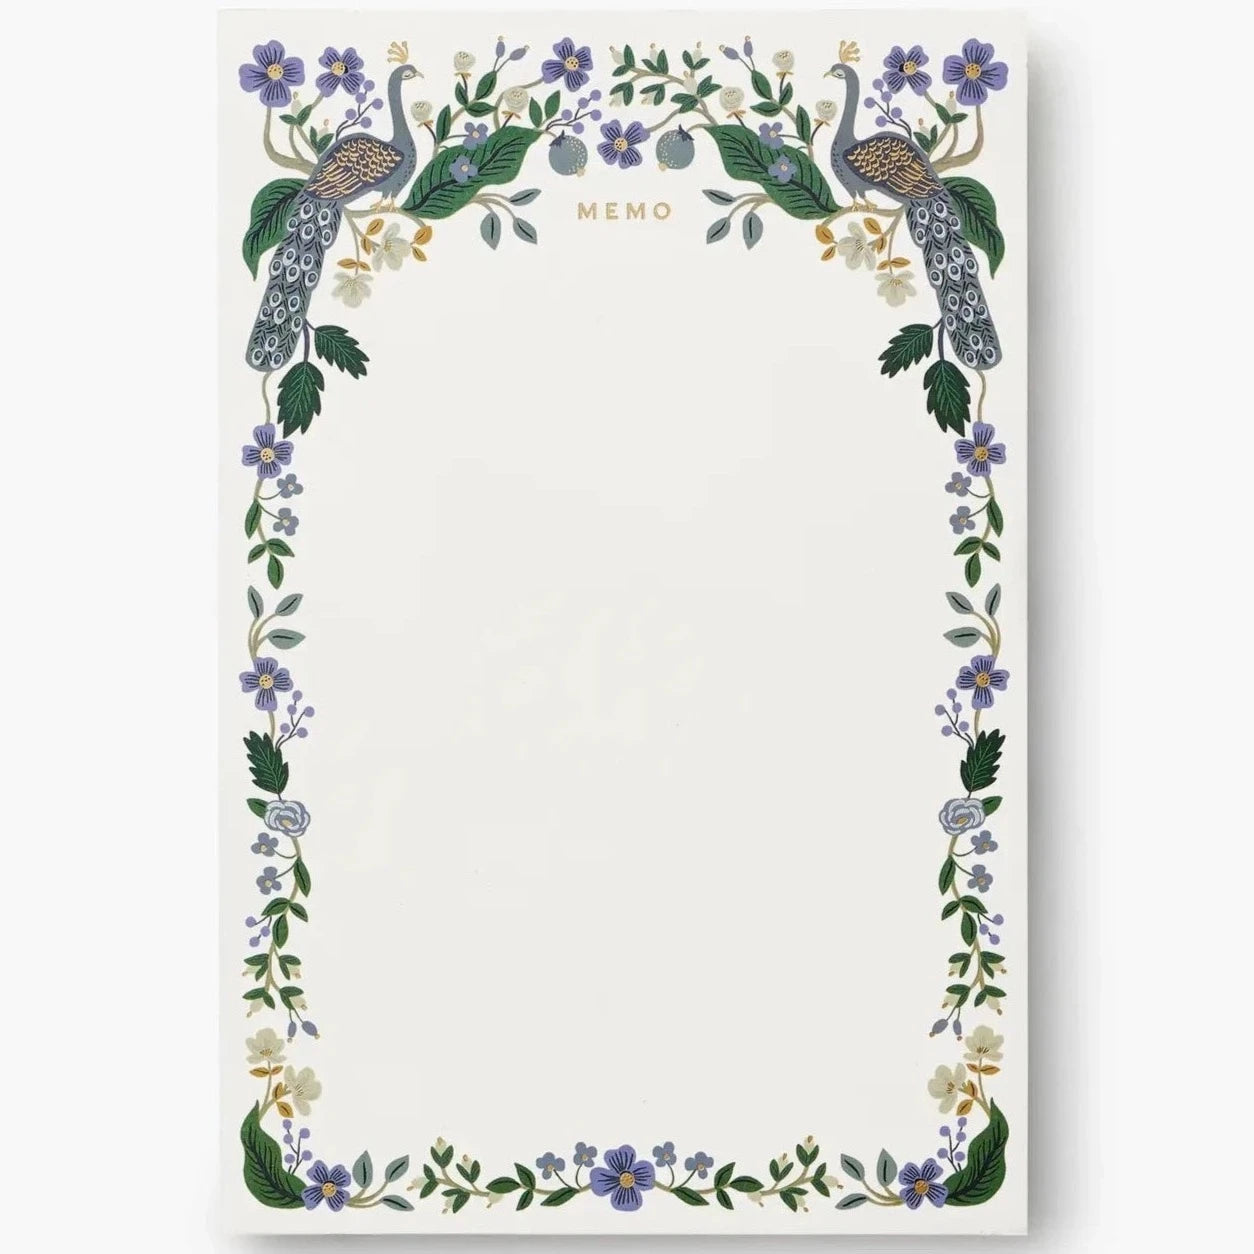 white memo pad with the word "memo" printed in gold foil at the top. Around the borders of the page are blue peacocks and blue flowers with greenery